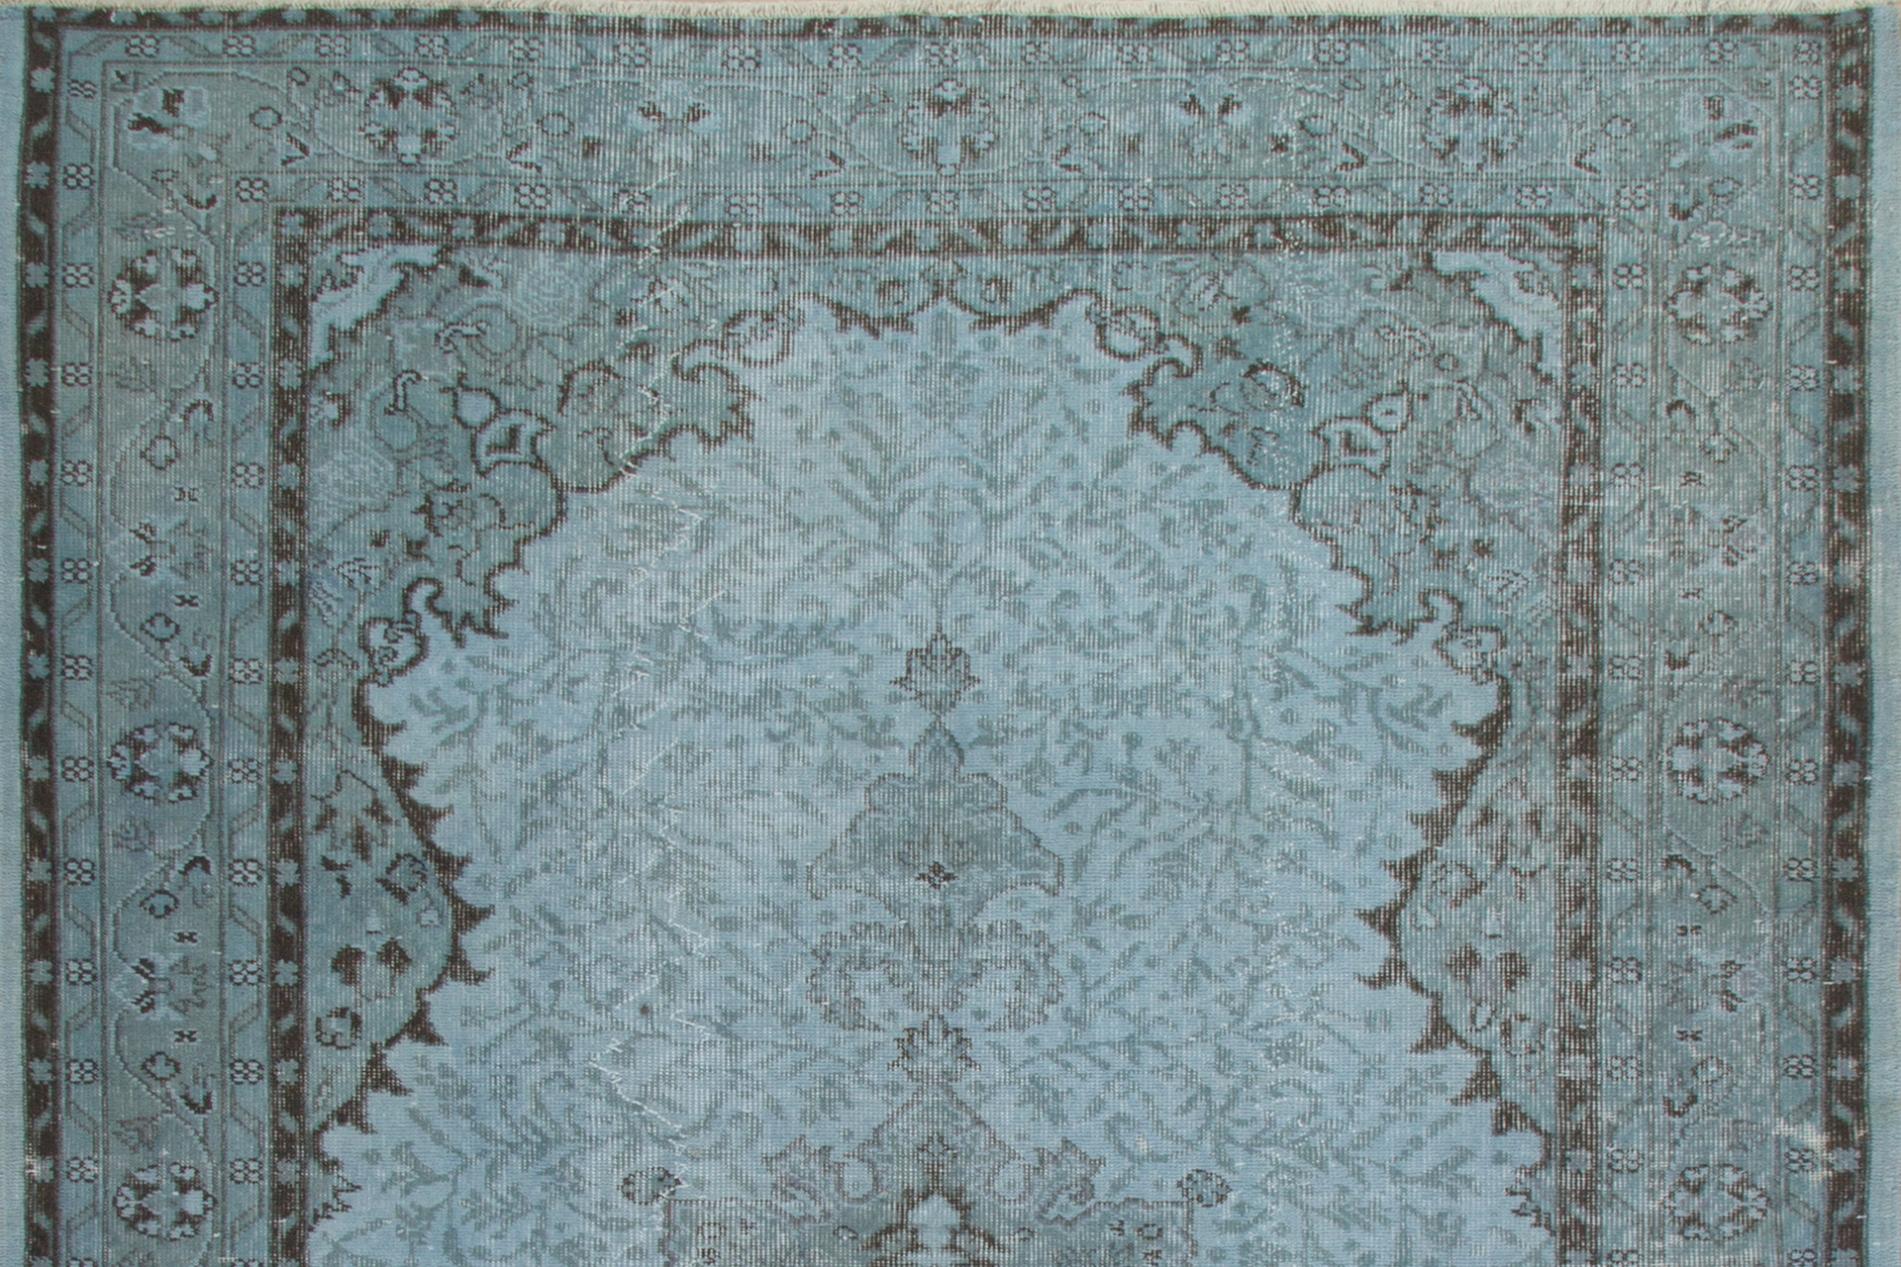 A vintage Turkish area rug over-dyed in light blue color for contemporary interiors.
The rug is finely hand-knotted, has low wool pile on cotton foundation. It is in very good condition, professionally washed, sturdy and suitable for areas with high